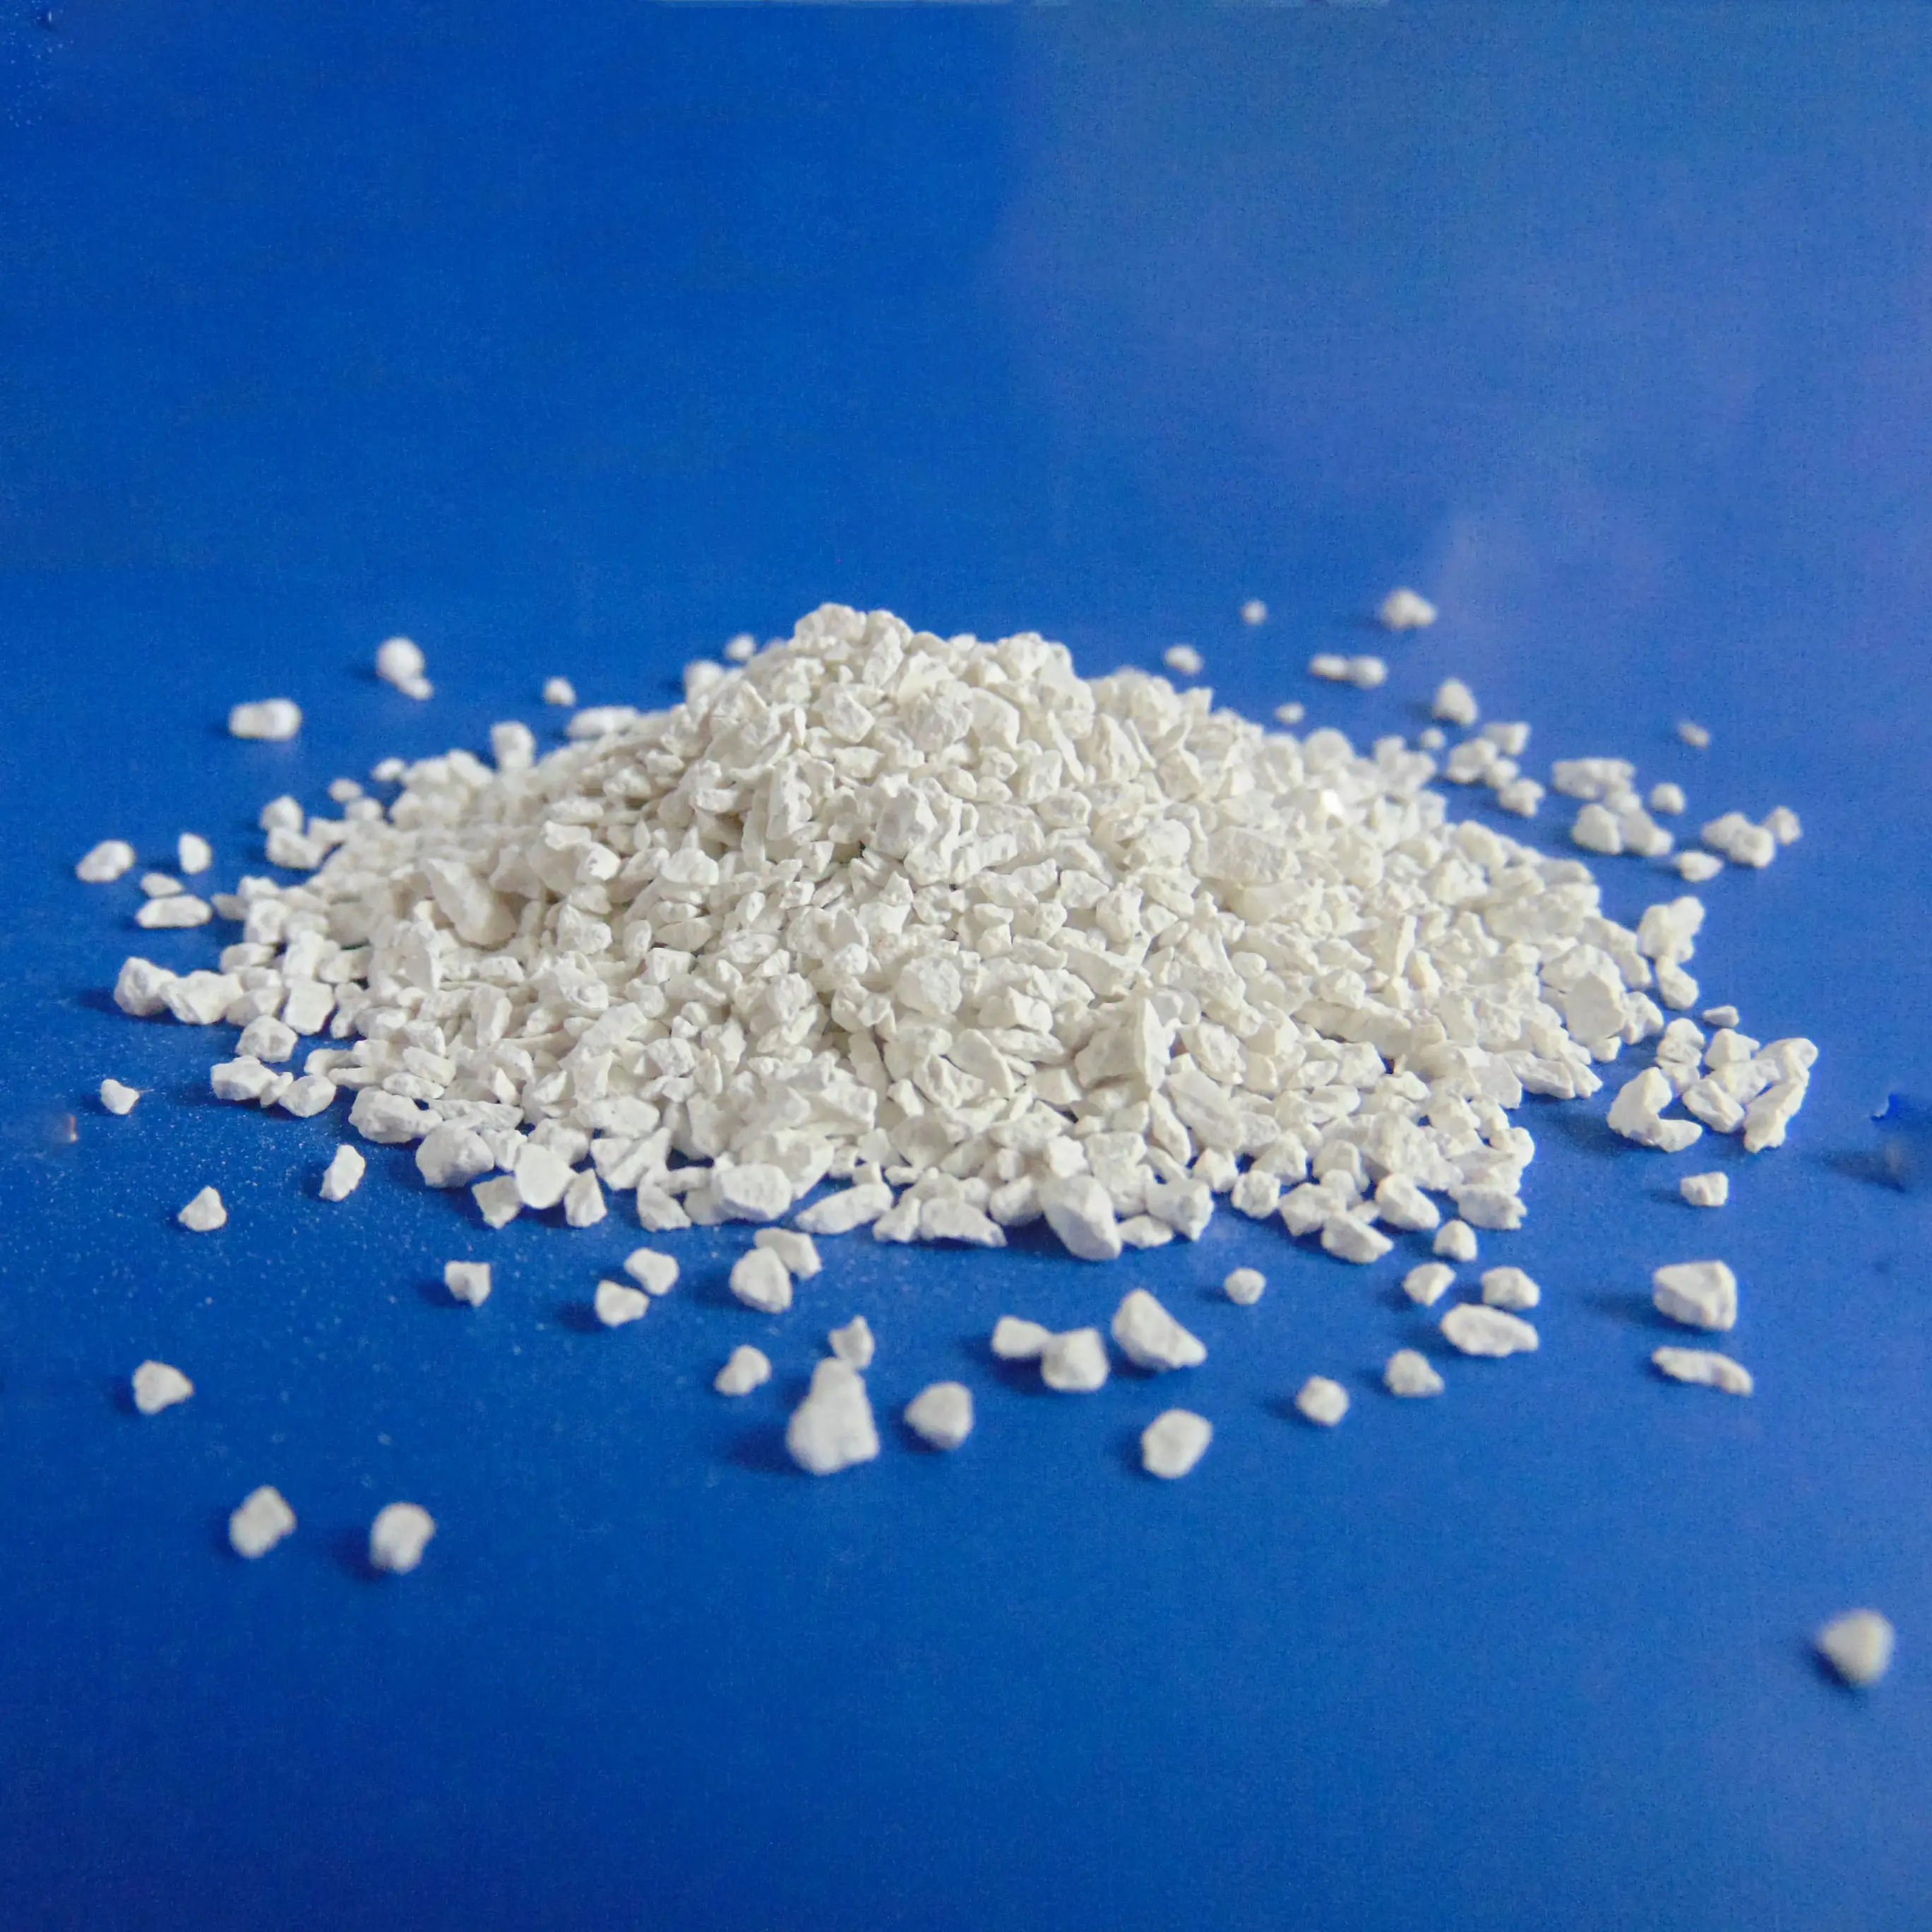 chlorine Stabilized good Quality calcium hypochlorite with good price